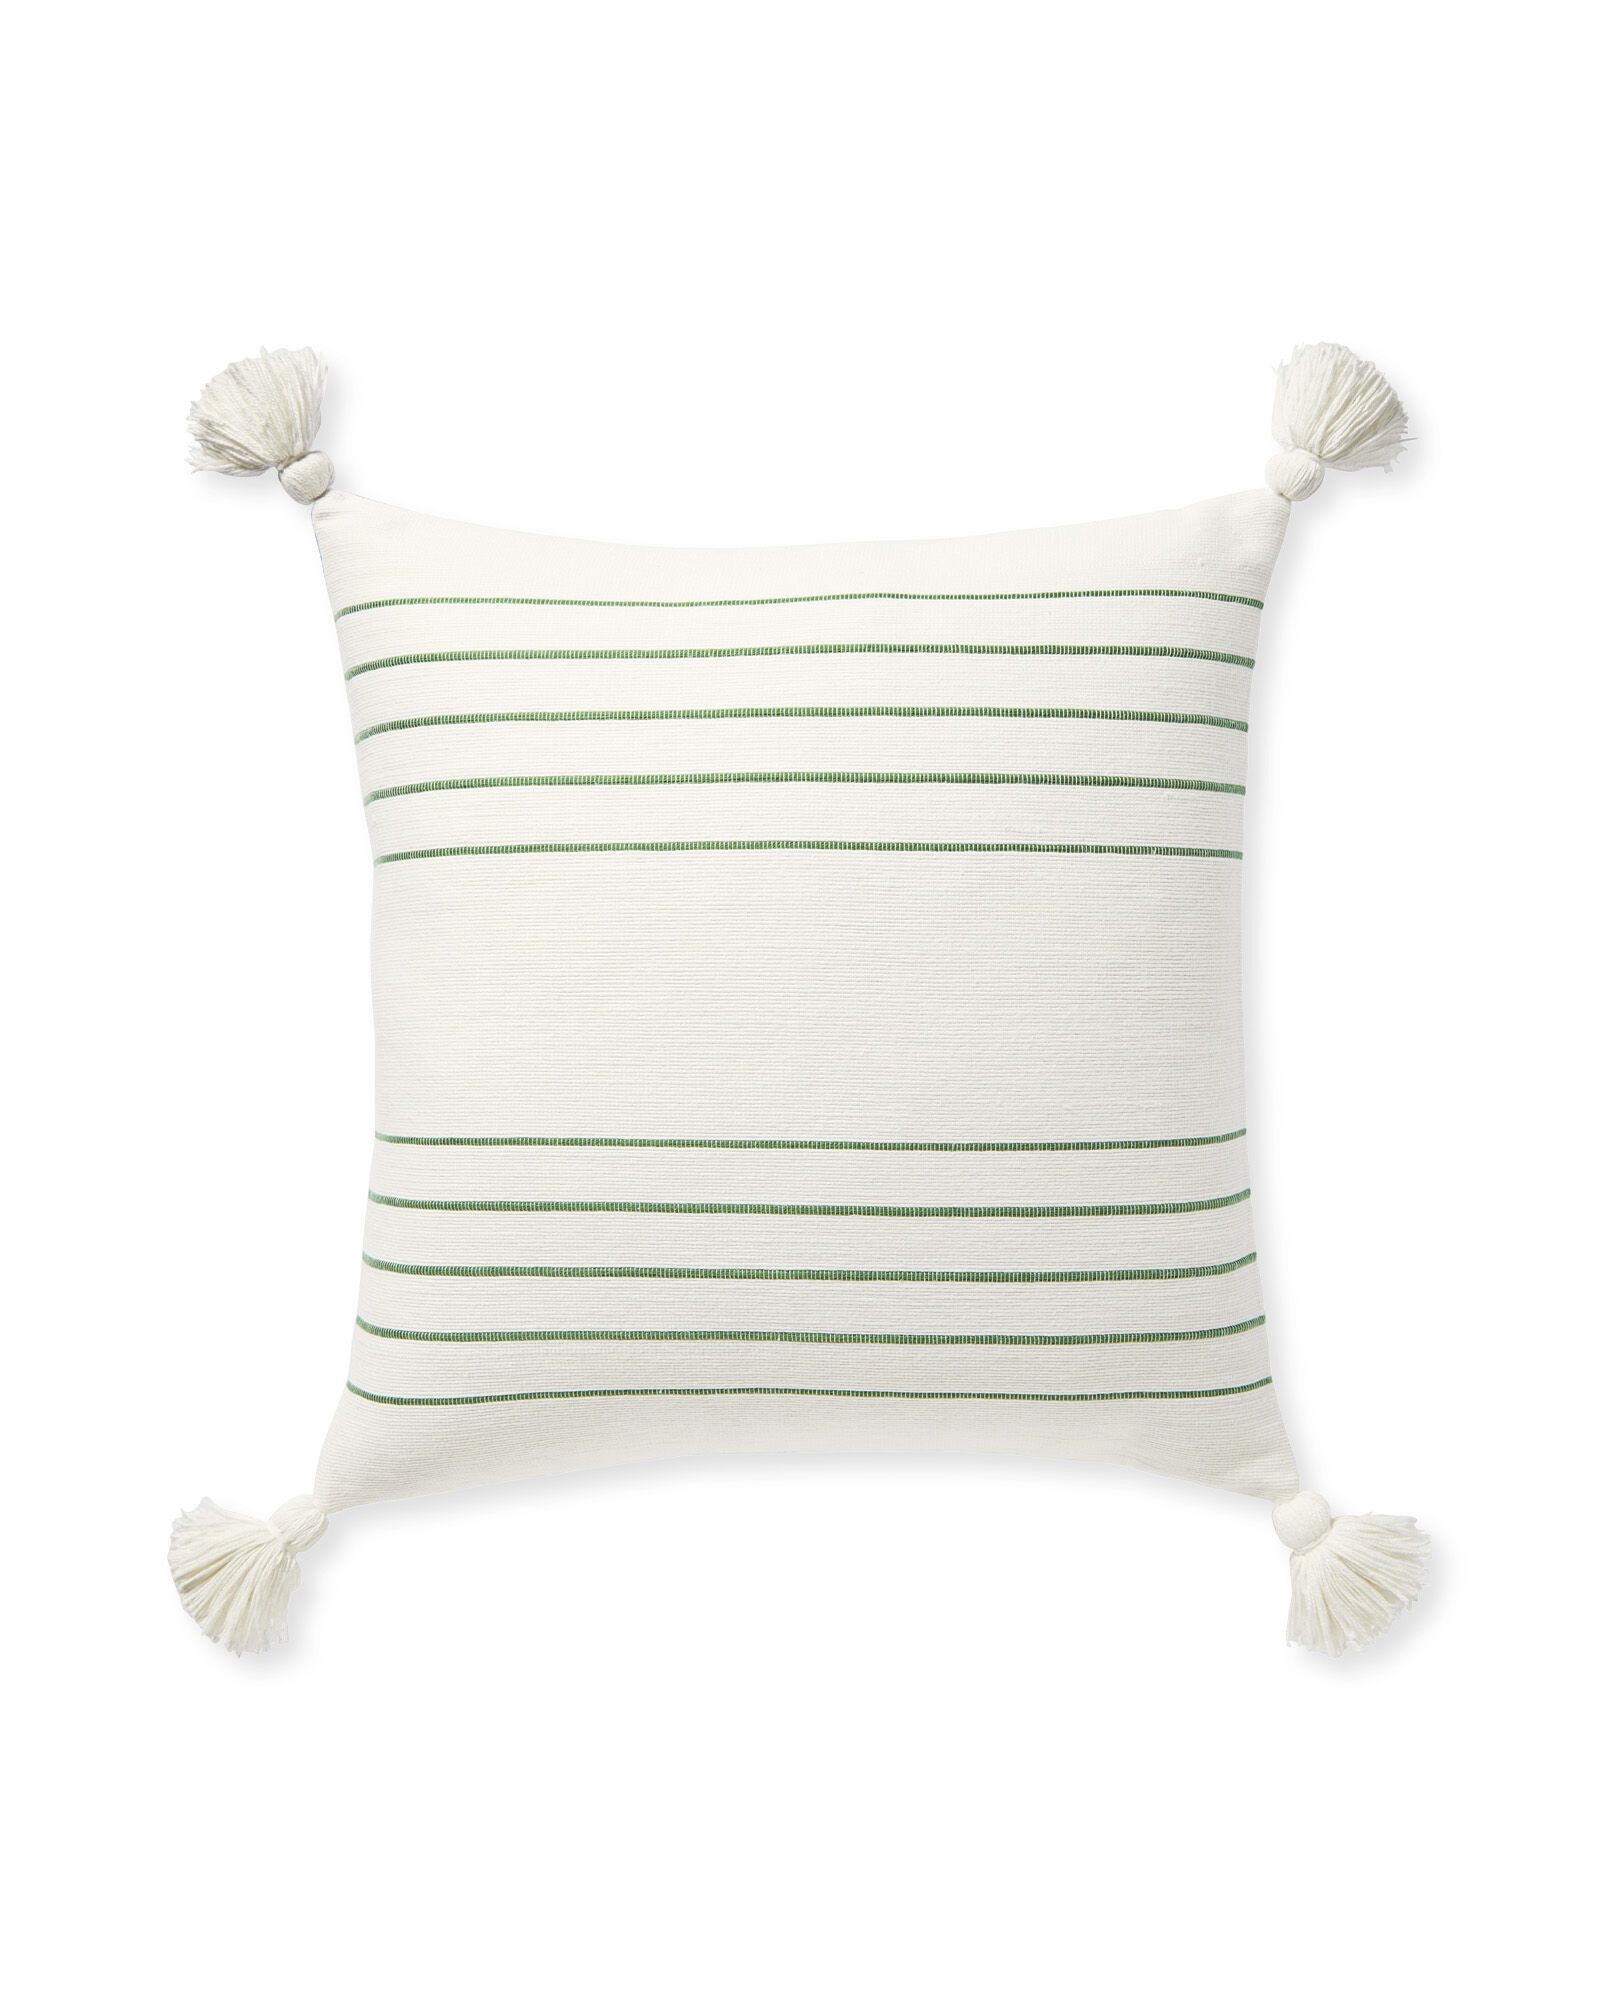 Del Mar Pillow Cover | Serena and Lily